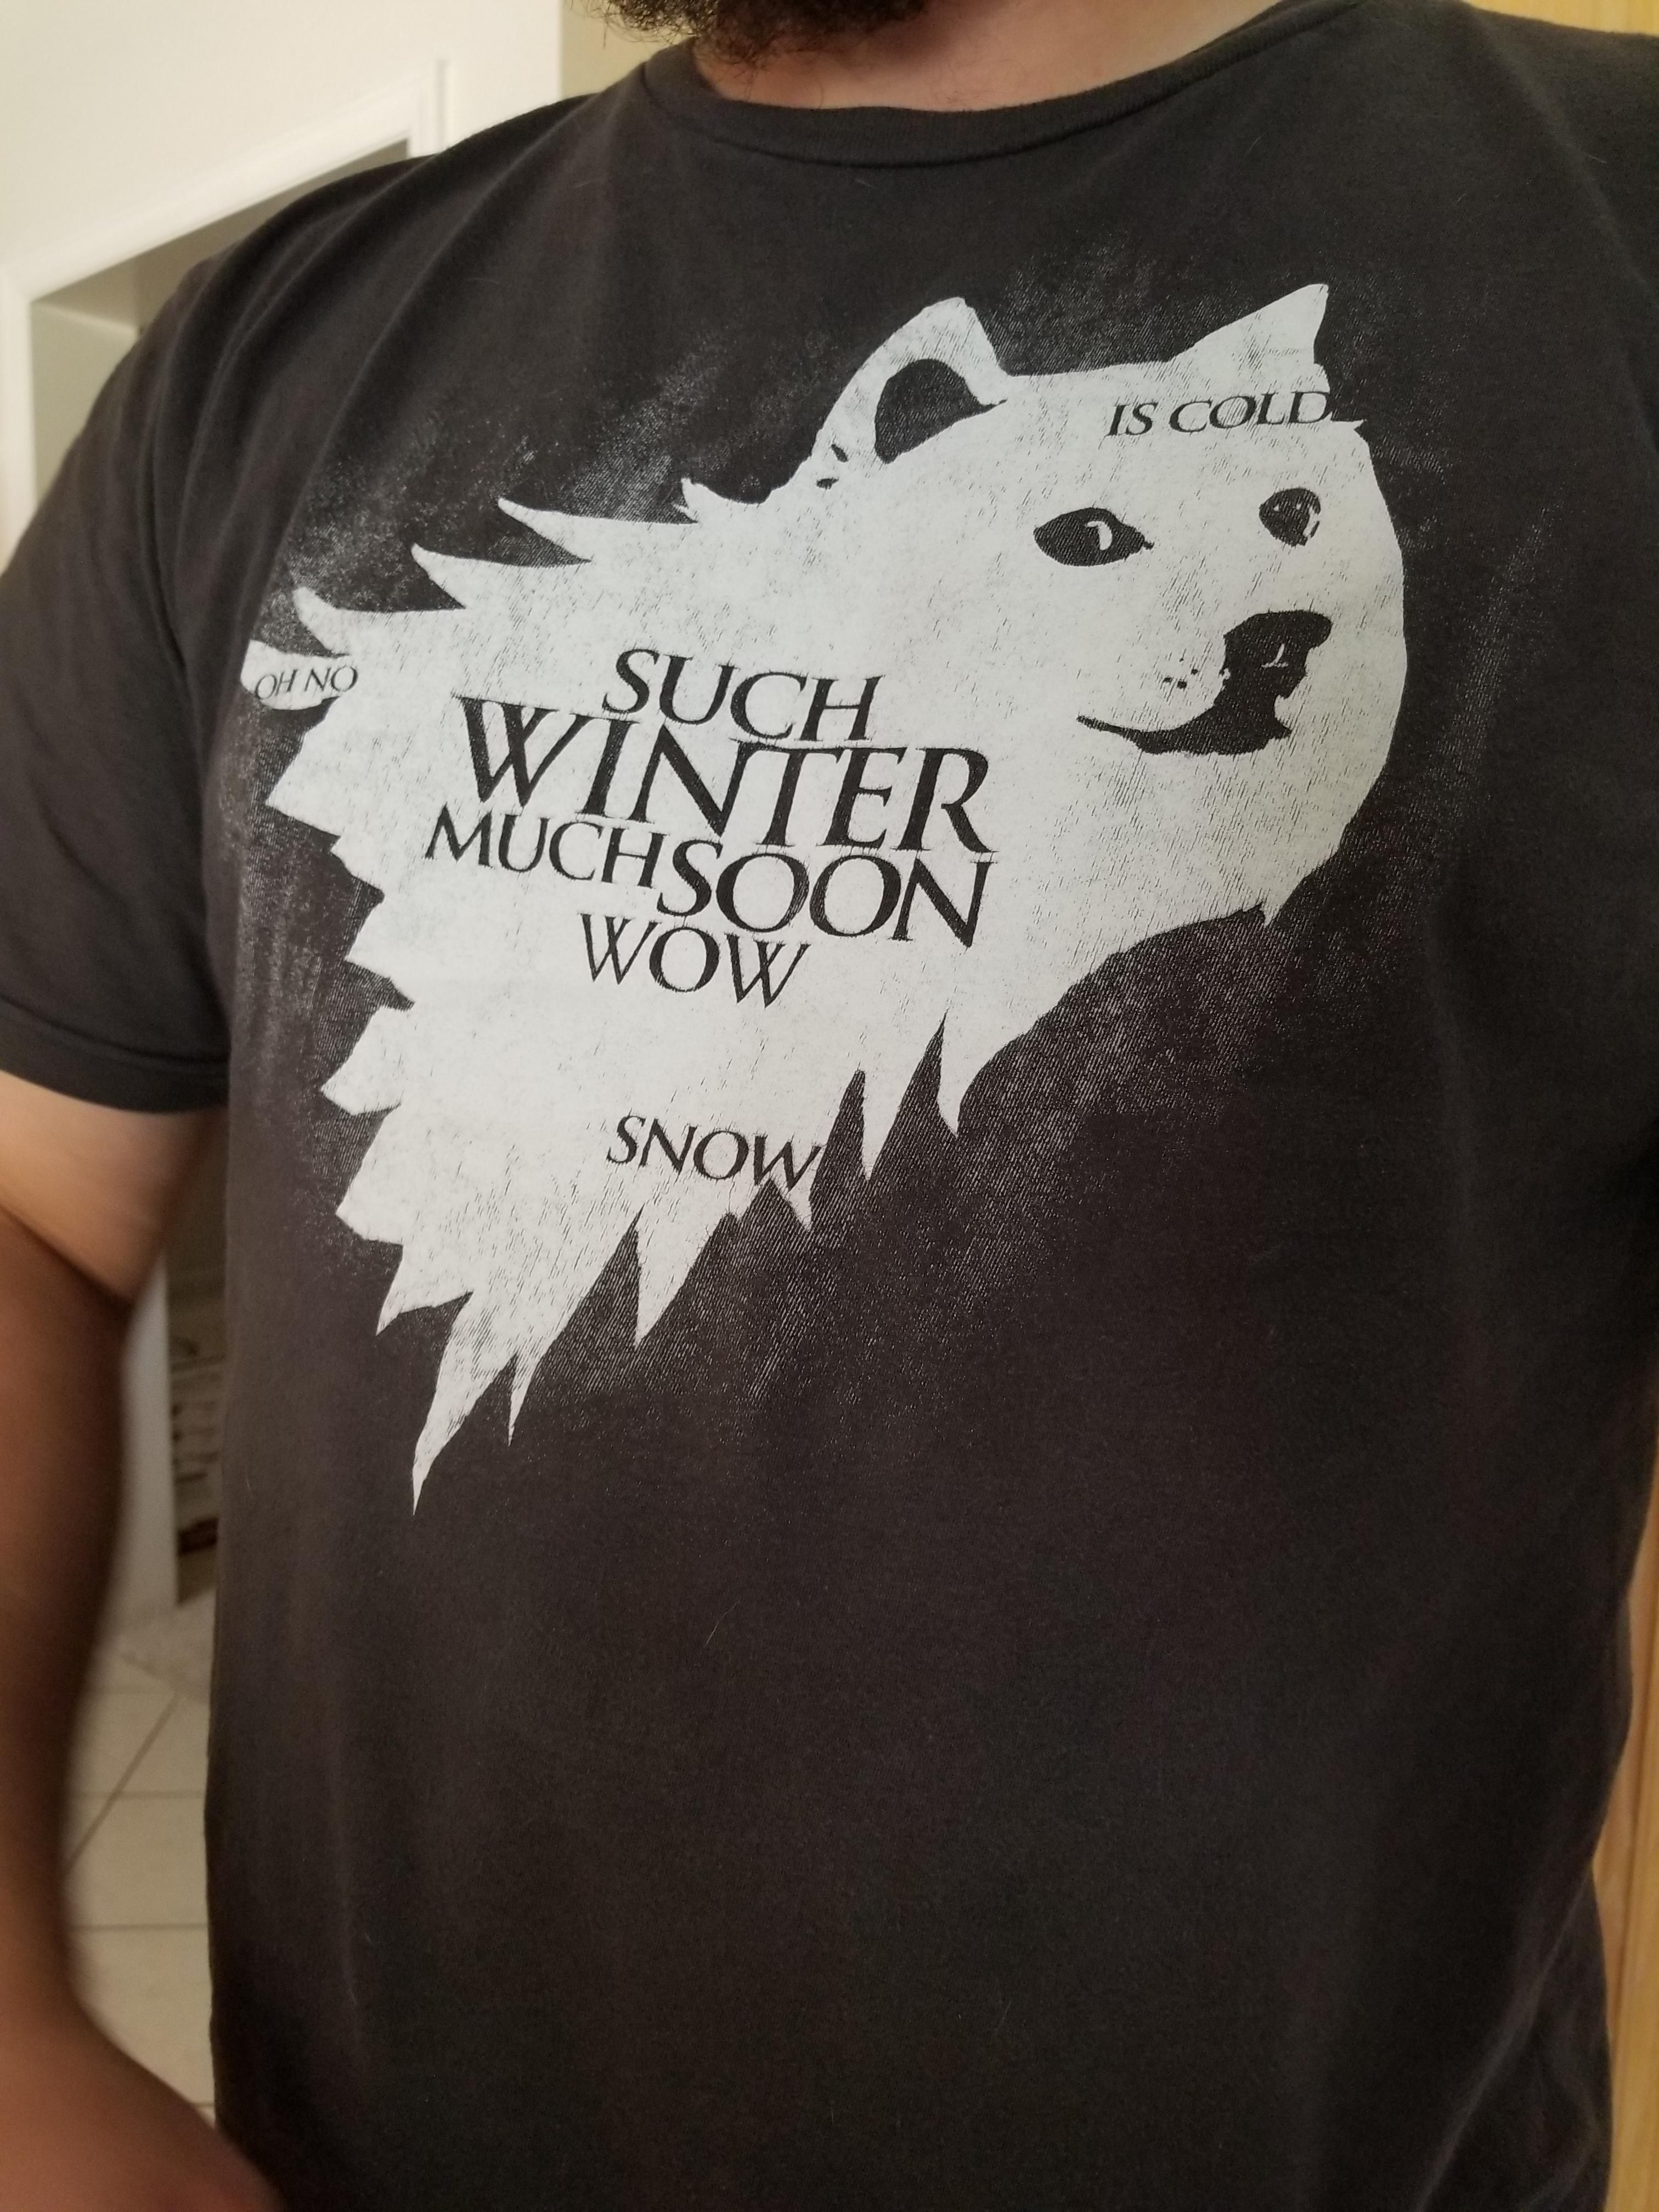 My friend wore this shirt to our GoT party today.